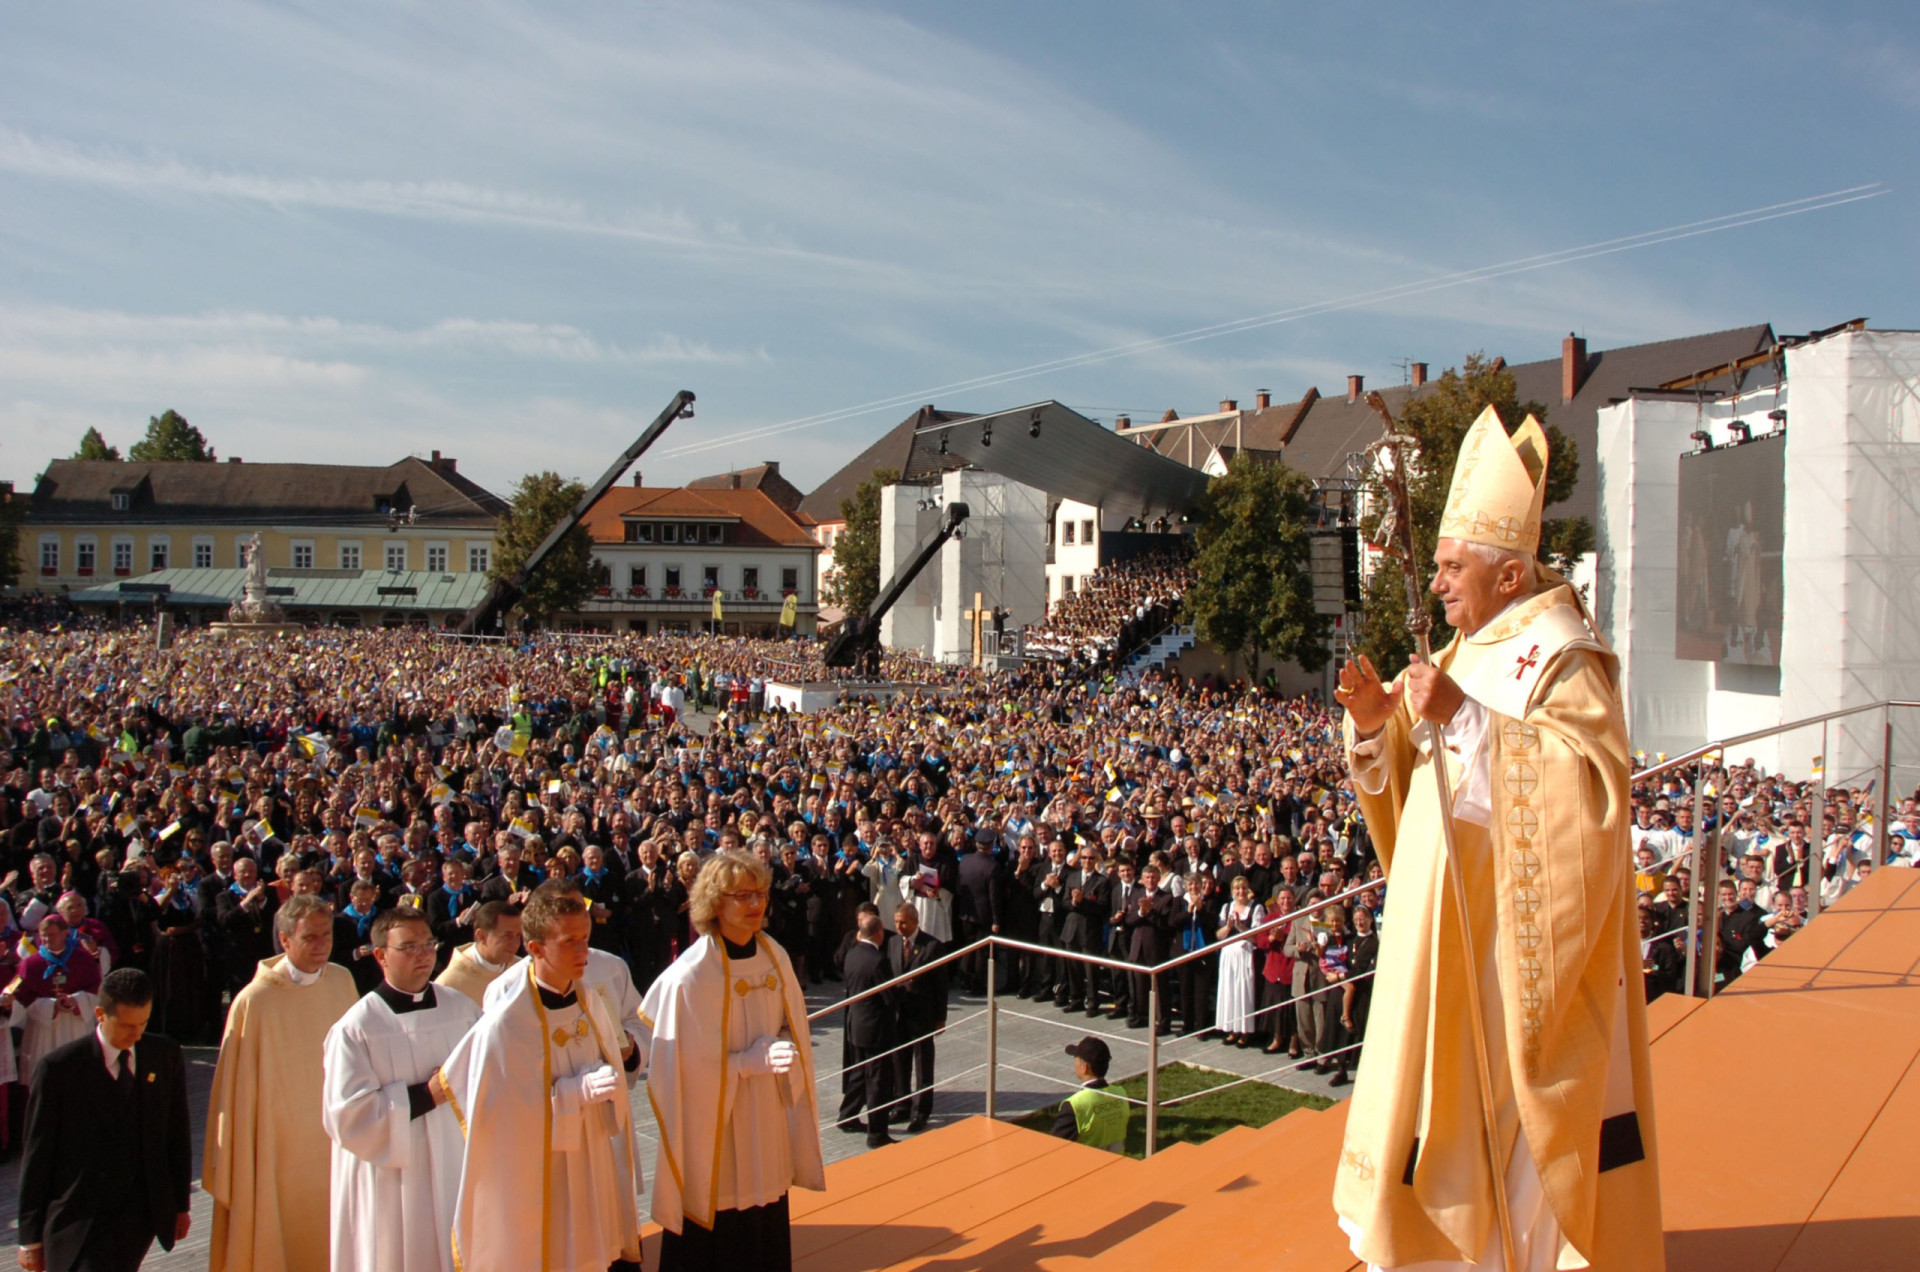 <p>For over 500 years, this Bavarian town has been one of Germany's most important places of pilgrimage, venerating the Virgin Mary.</p><p>You may also like:<a href="https://www.starsinsider.com/n/244968?utm_source=msn.com&utm_medium=display&utm_campaign=referral_description&utm_content=524487en-us"> The UK from above: the best drone photography</a></p>